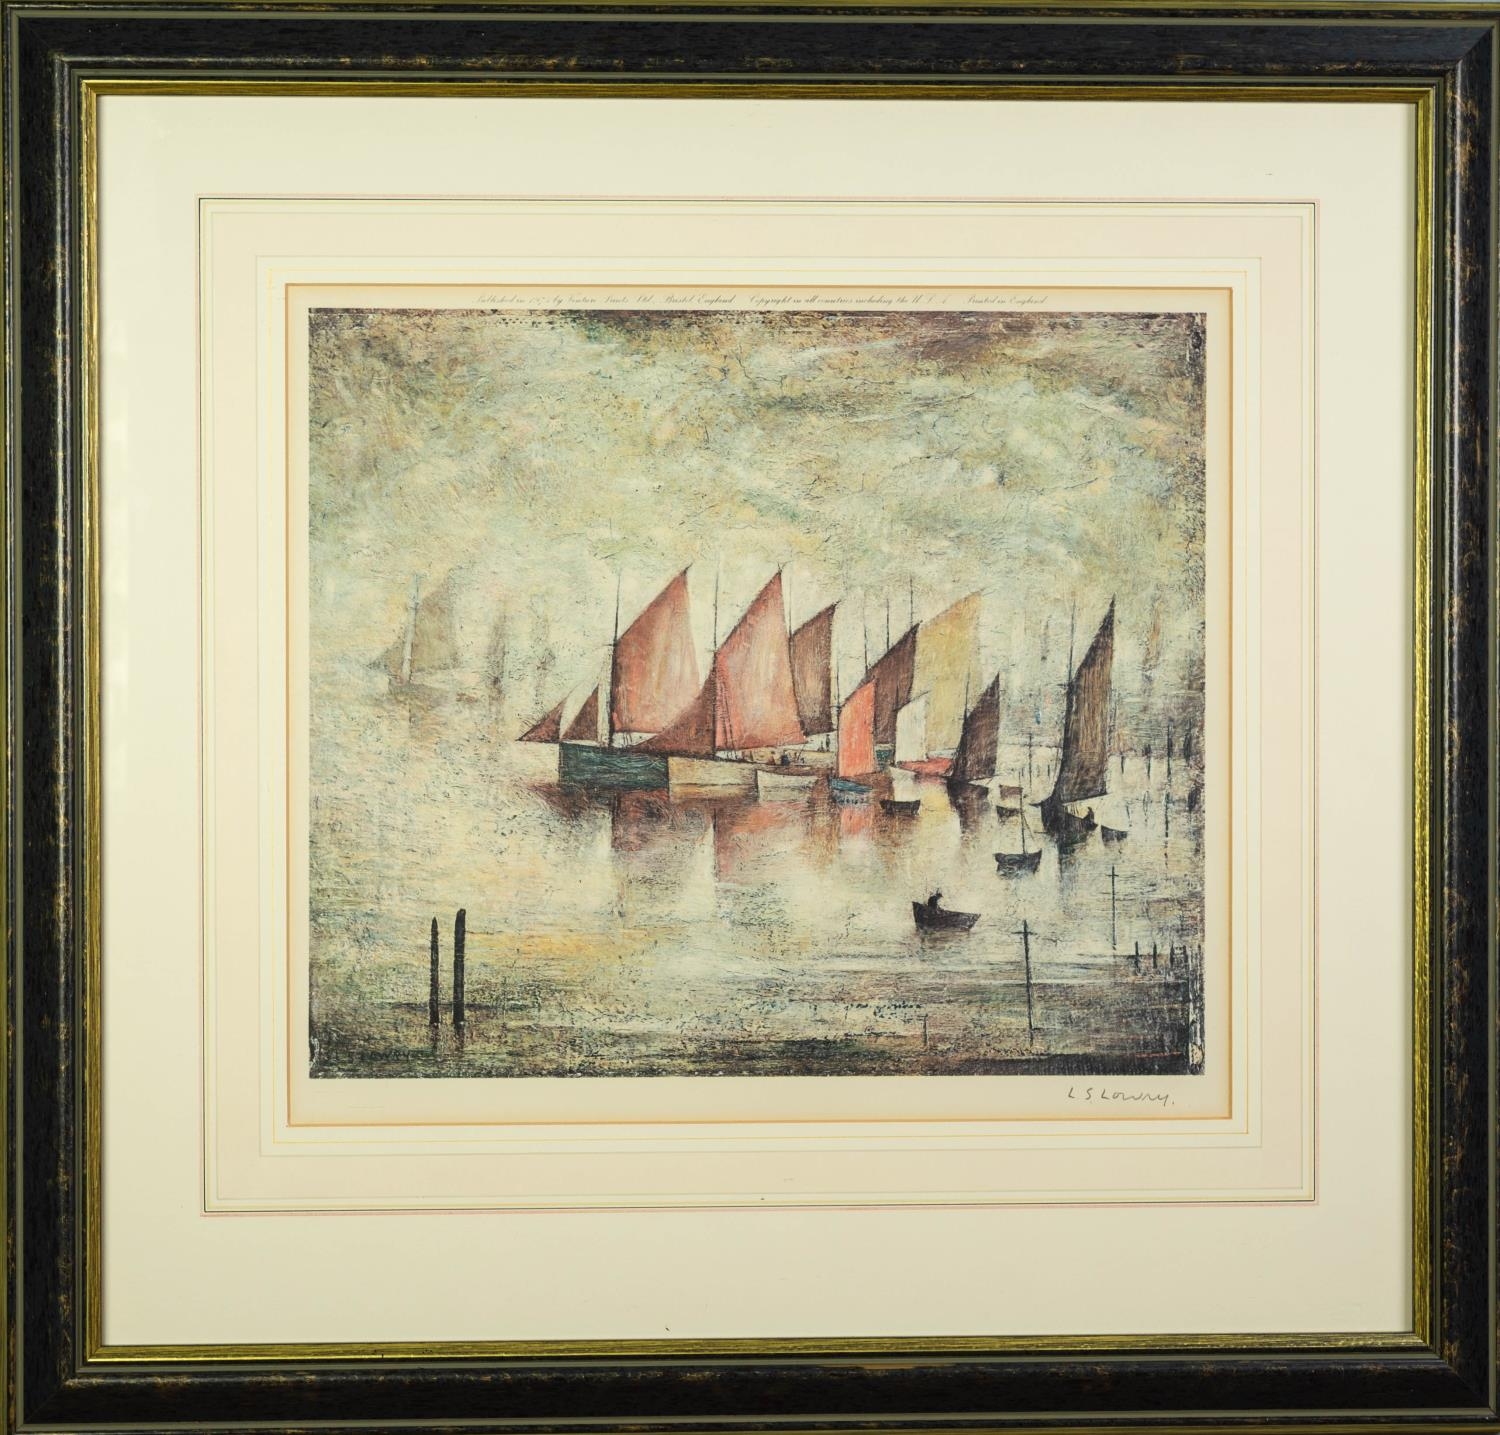 L.S. LOWRY (1887 - 1976) ARTIST SIGNED LIMITED EDITION COLOUR PRINT Sailing Boats, an edition of 850 - Image 2 of 2